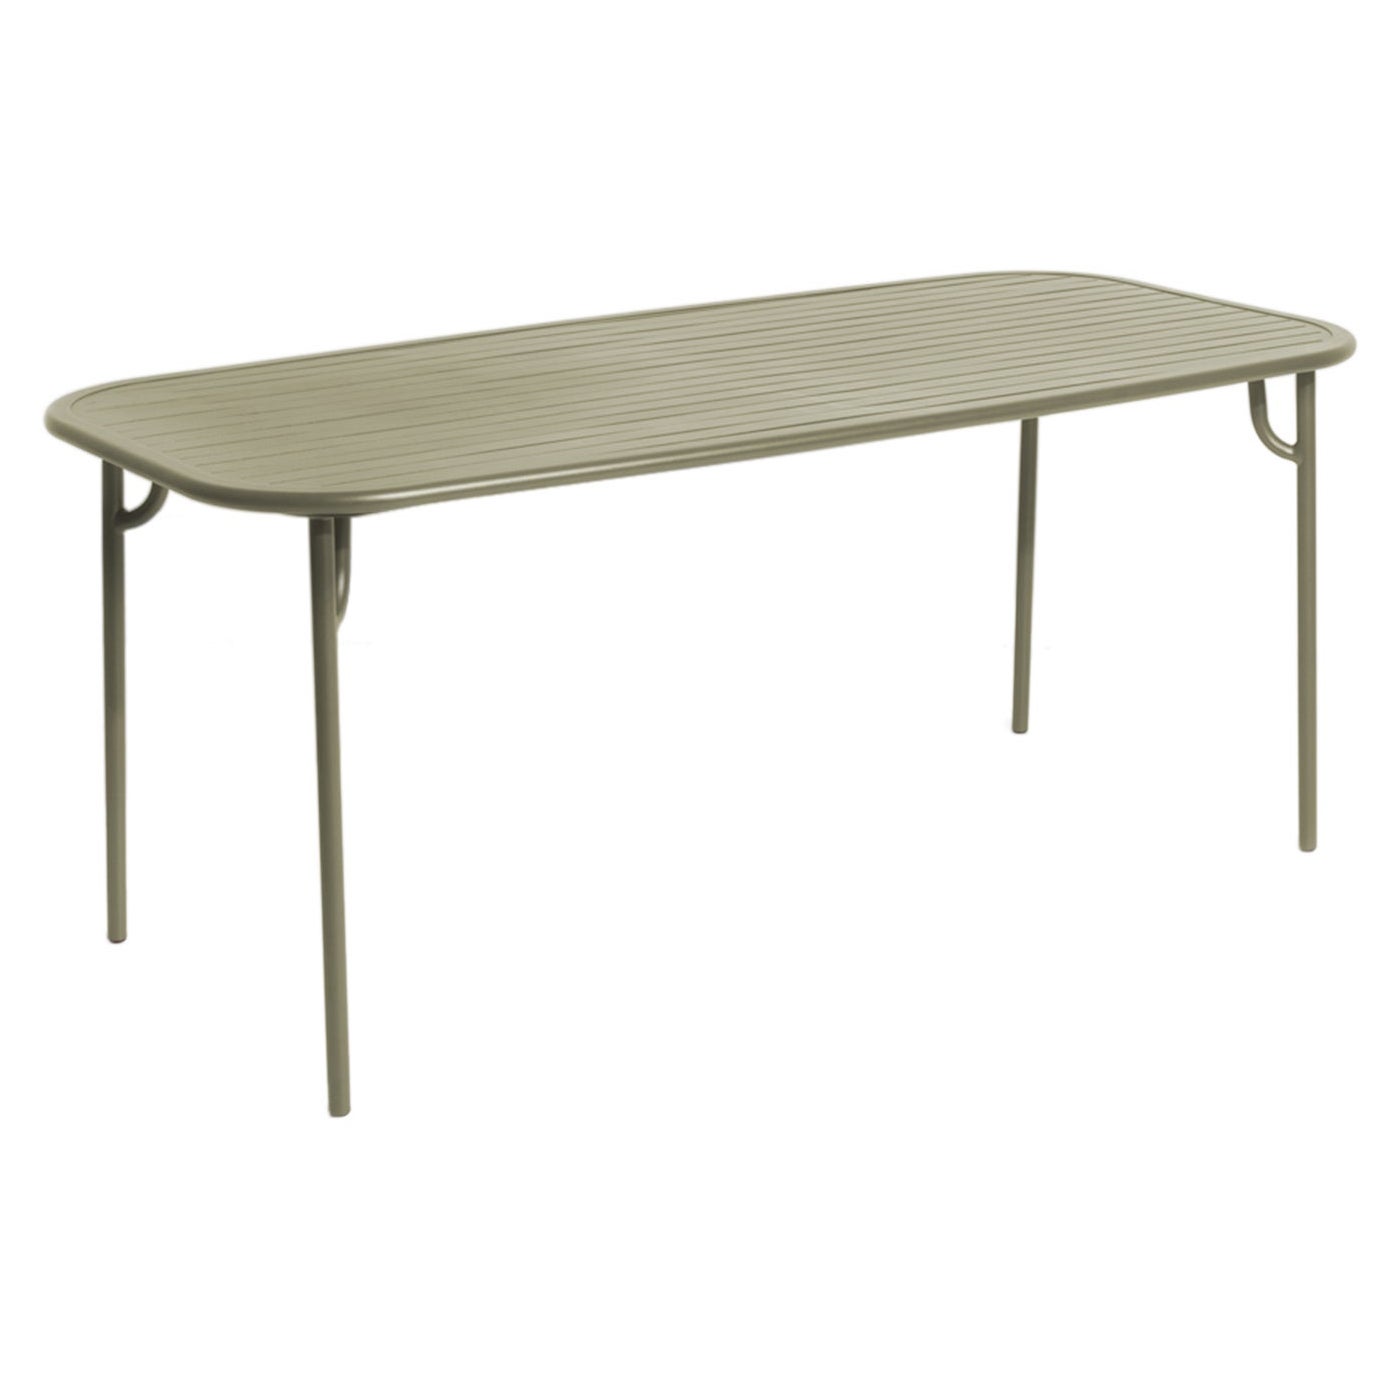 Petite Friture Week-End Medium Rectangular Dining Table in Jade Green with Slats For Sale